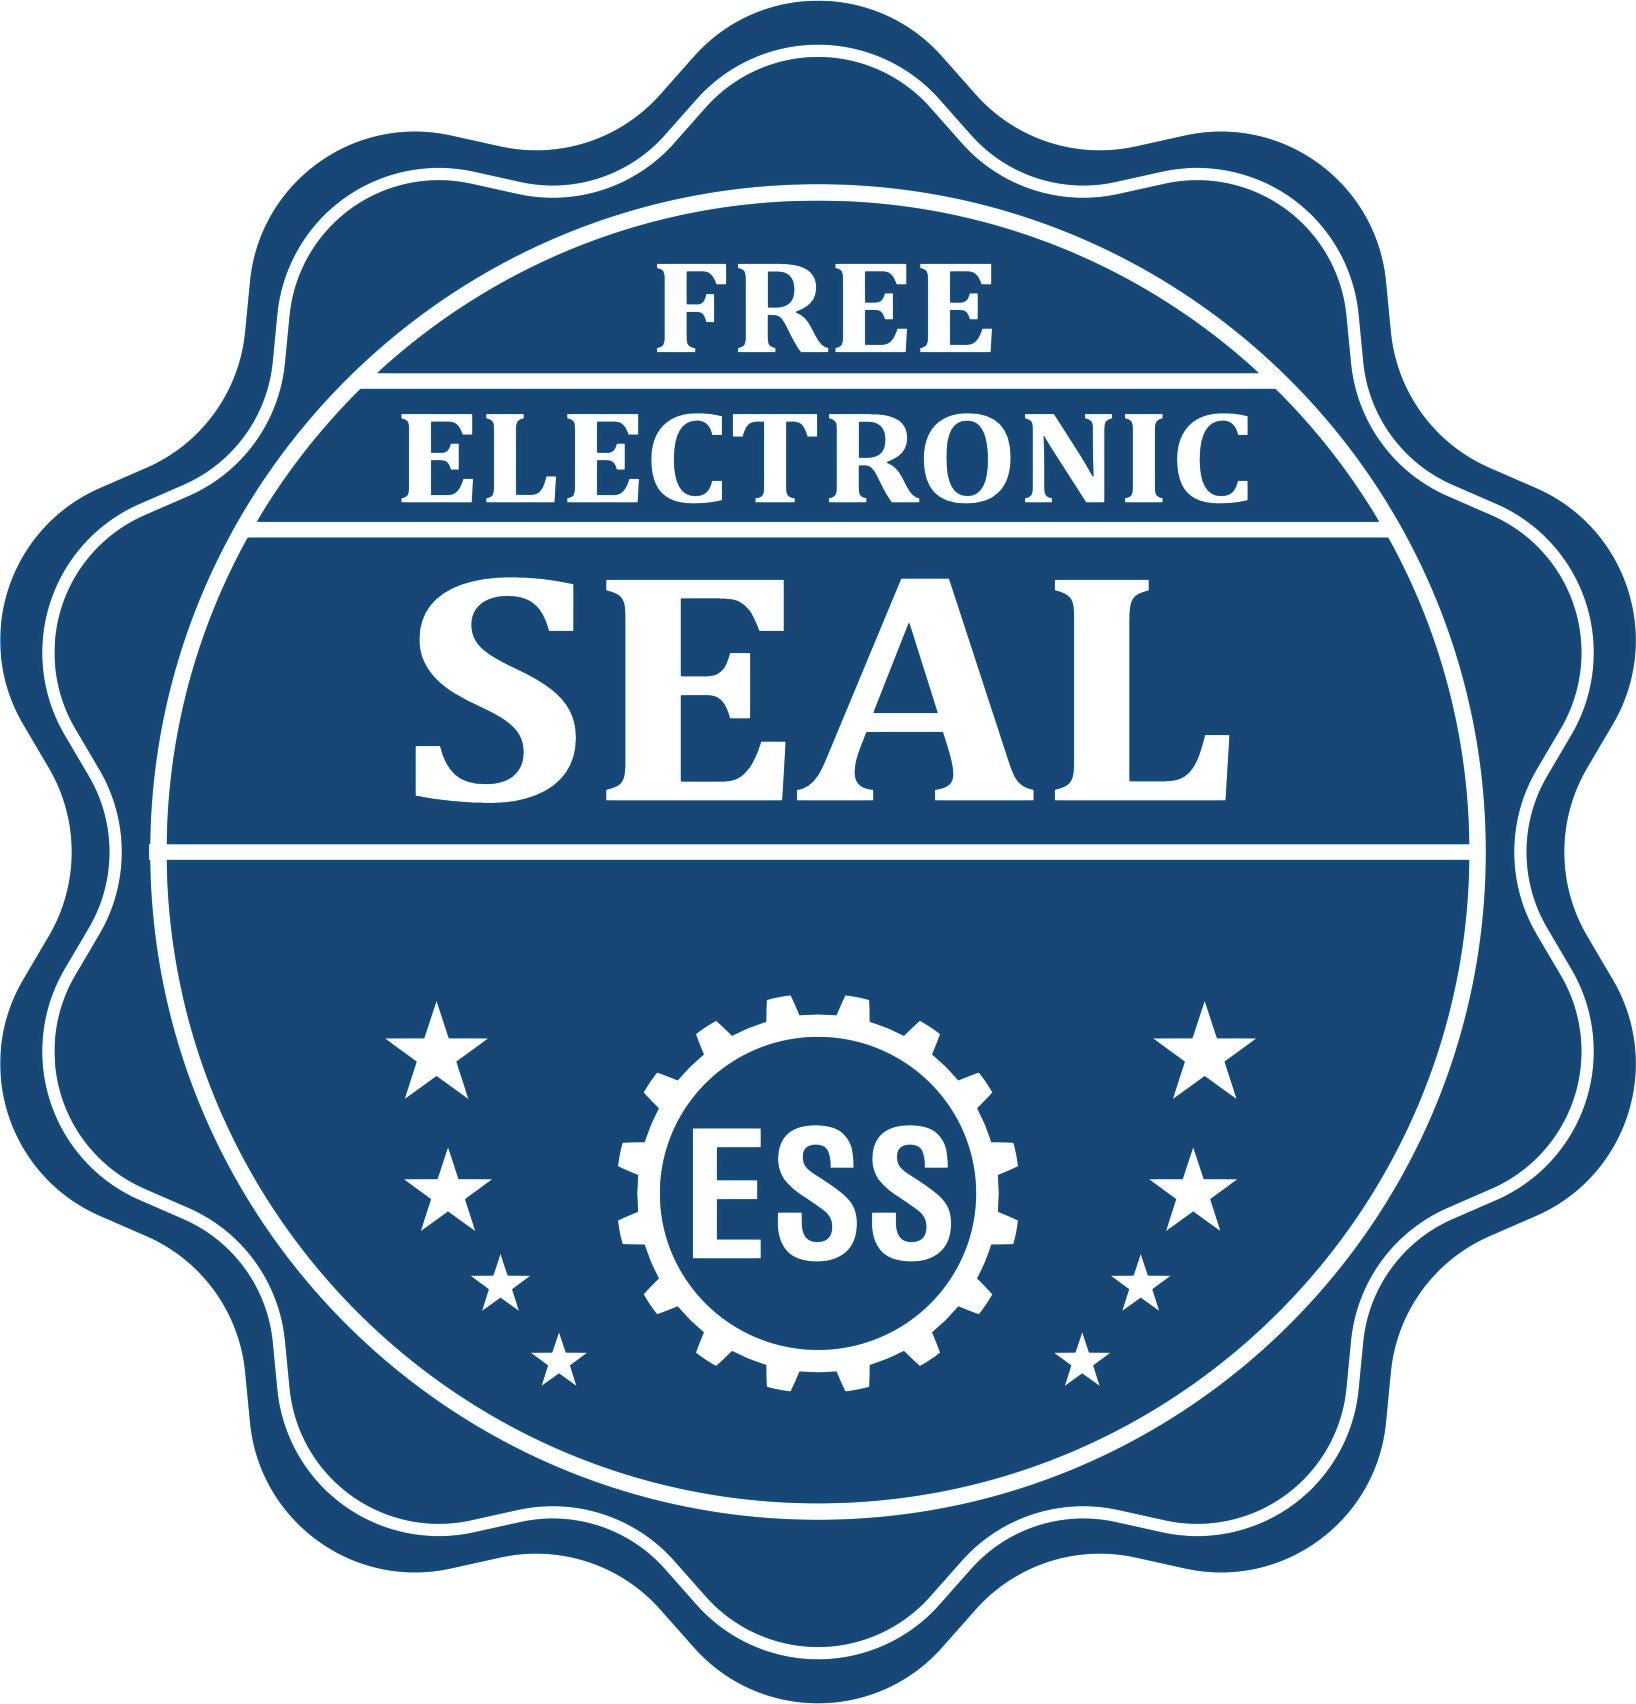 A badge showing a free electronic seal for the Mississippi Engineer Desk Seal with stars and the ESS gear on the emblem.